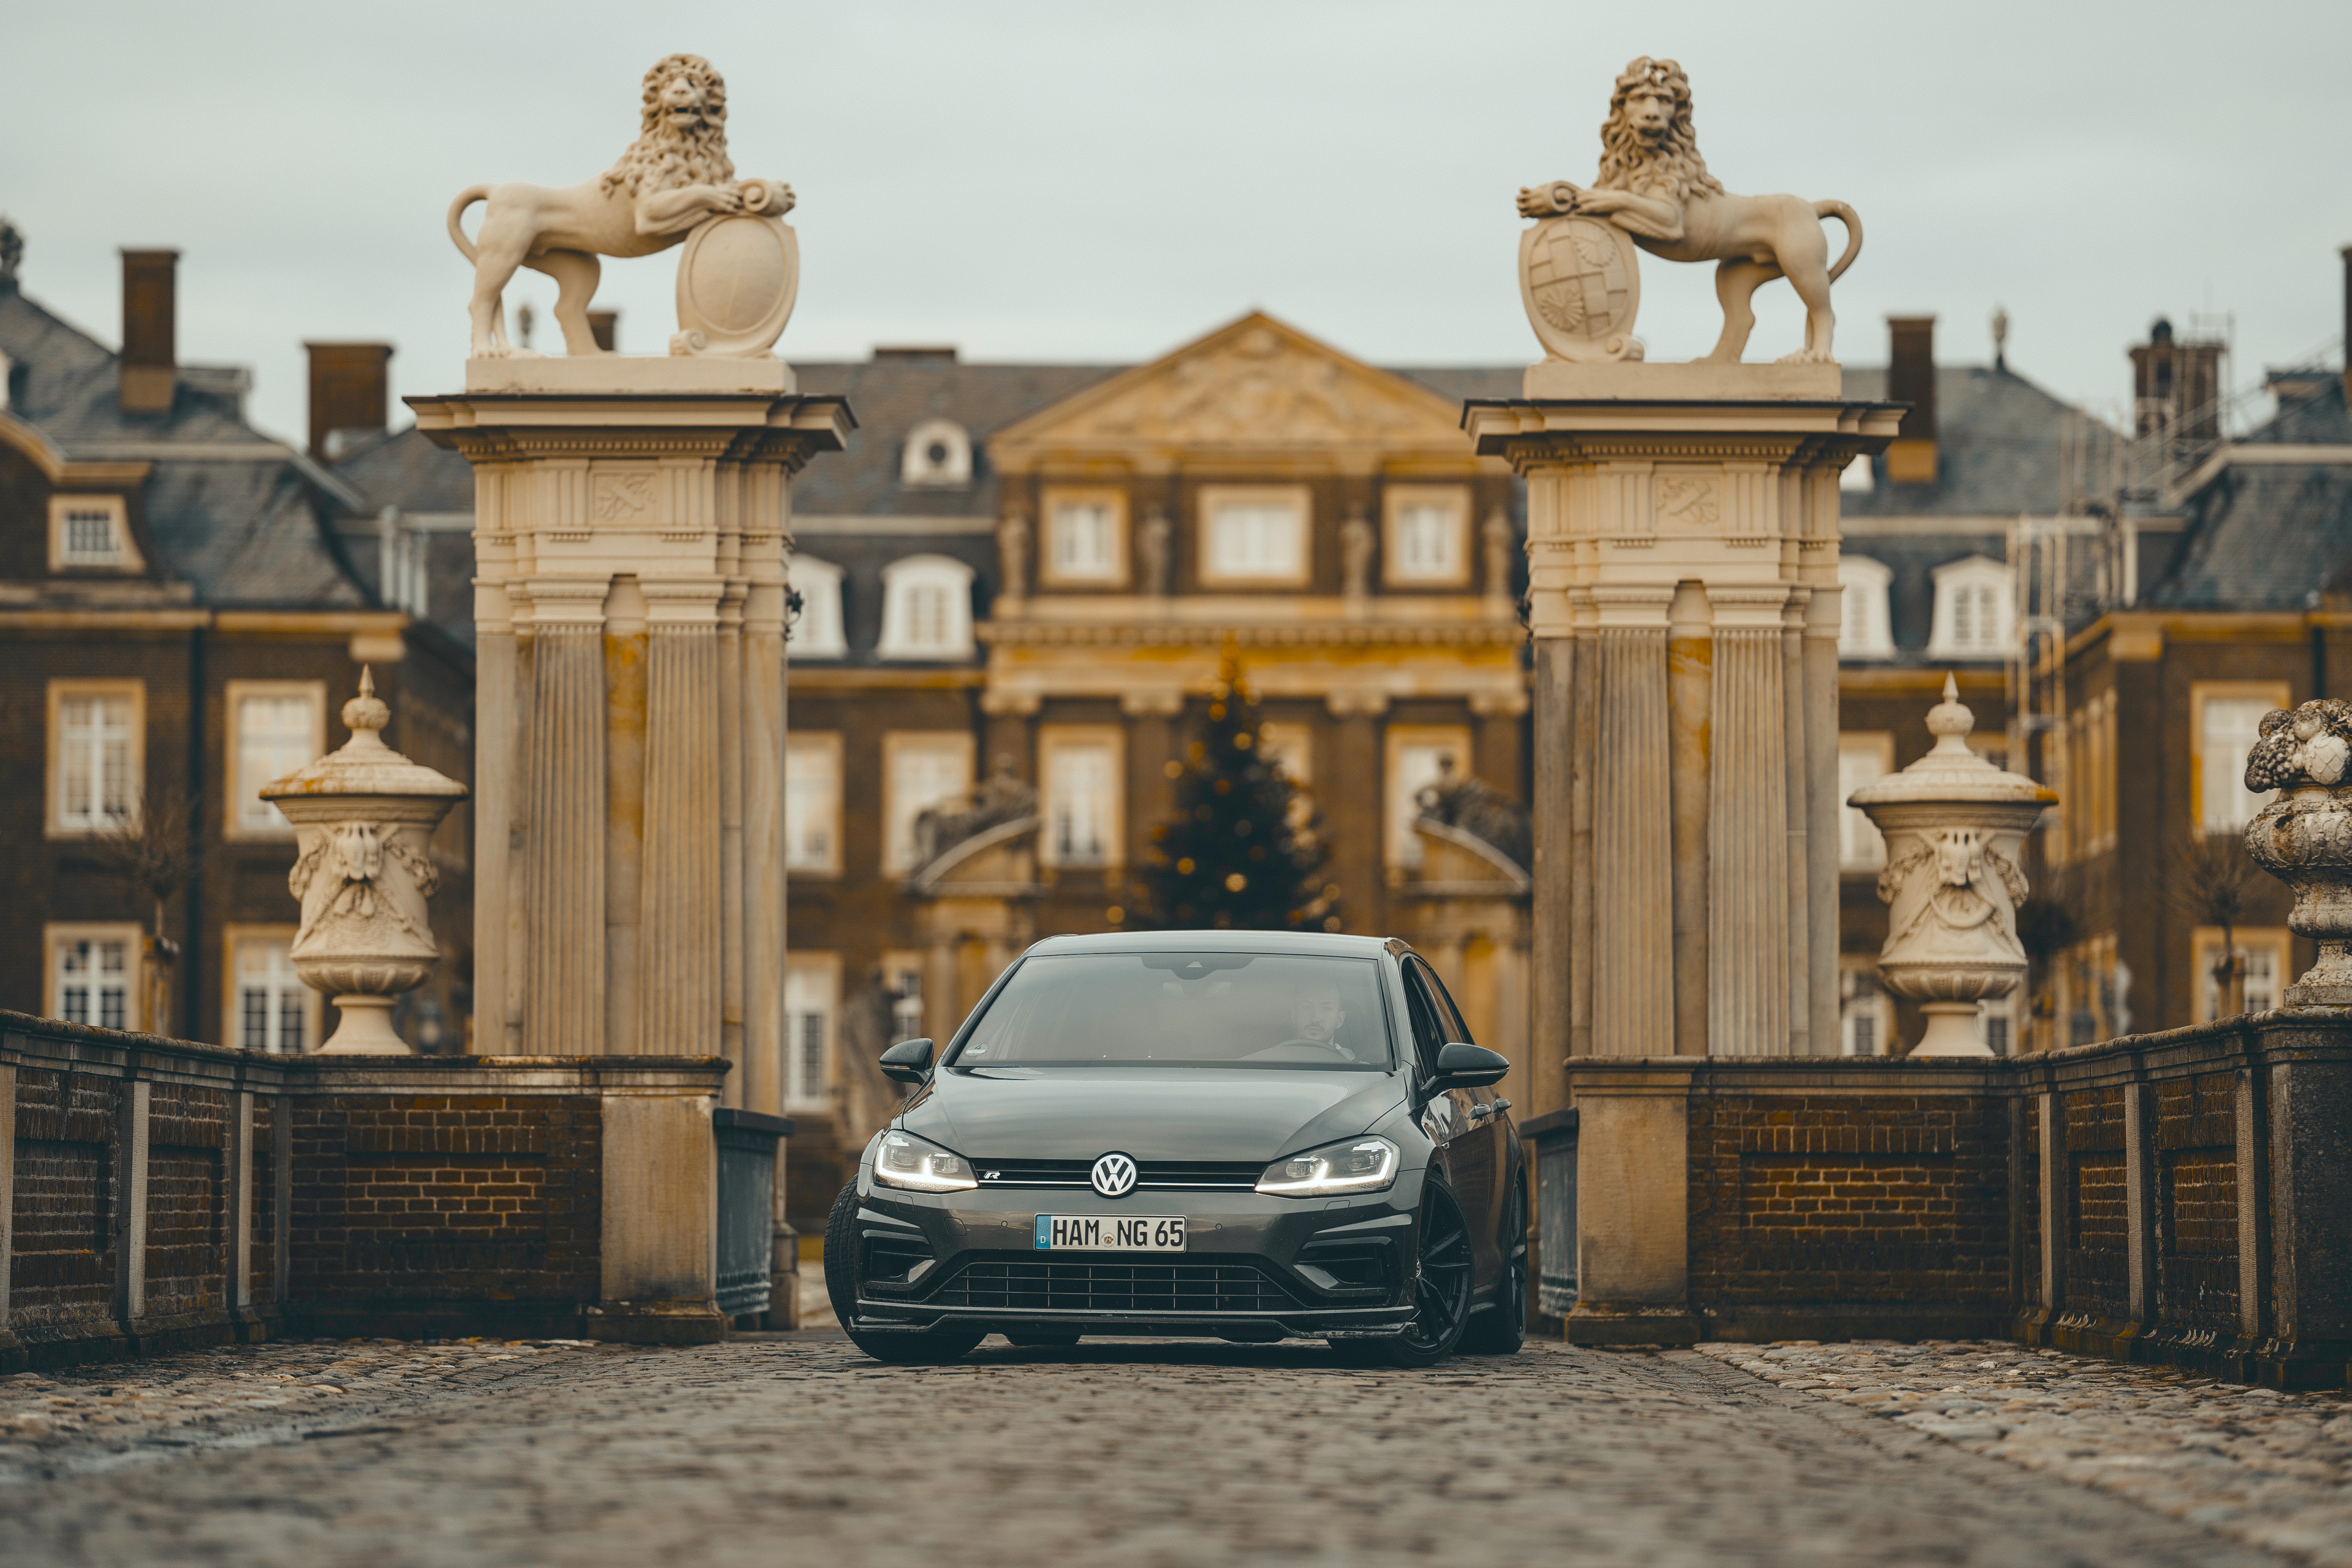 144618 free wallpaper 1125x2436 for phone, download images volkswagen, palace, column, cars 1125x2436 for mobile